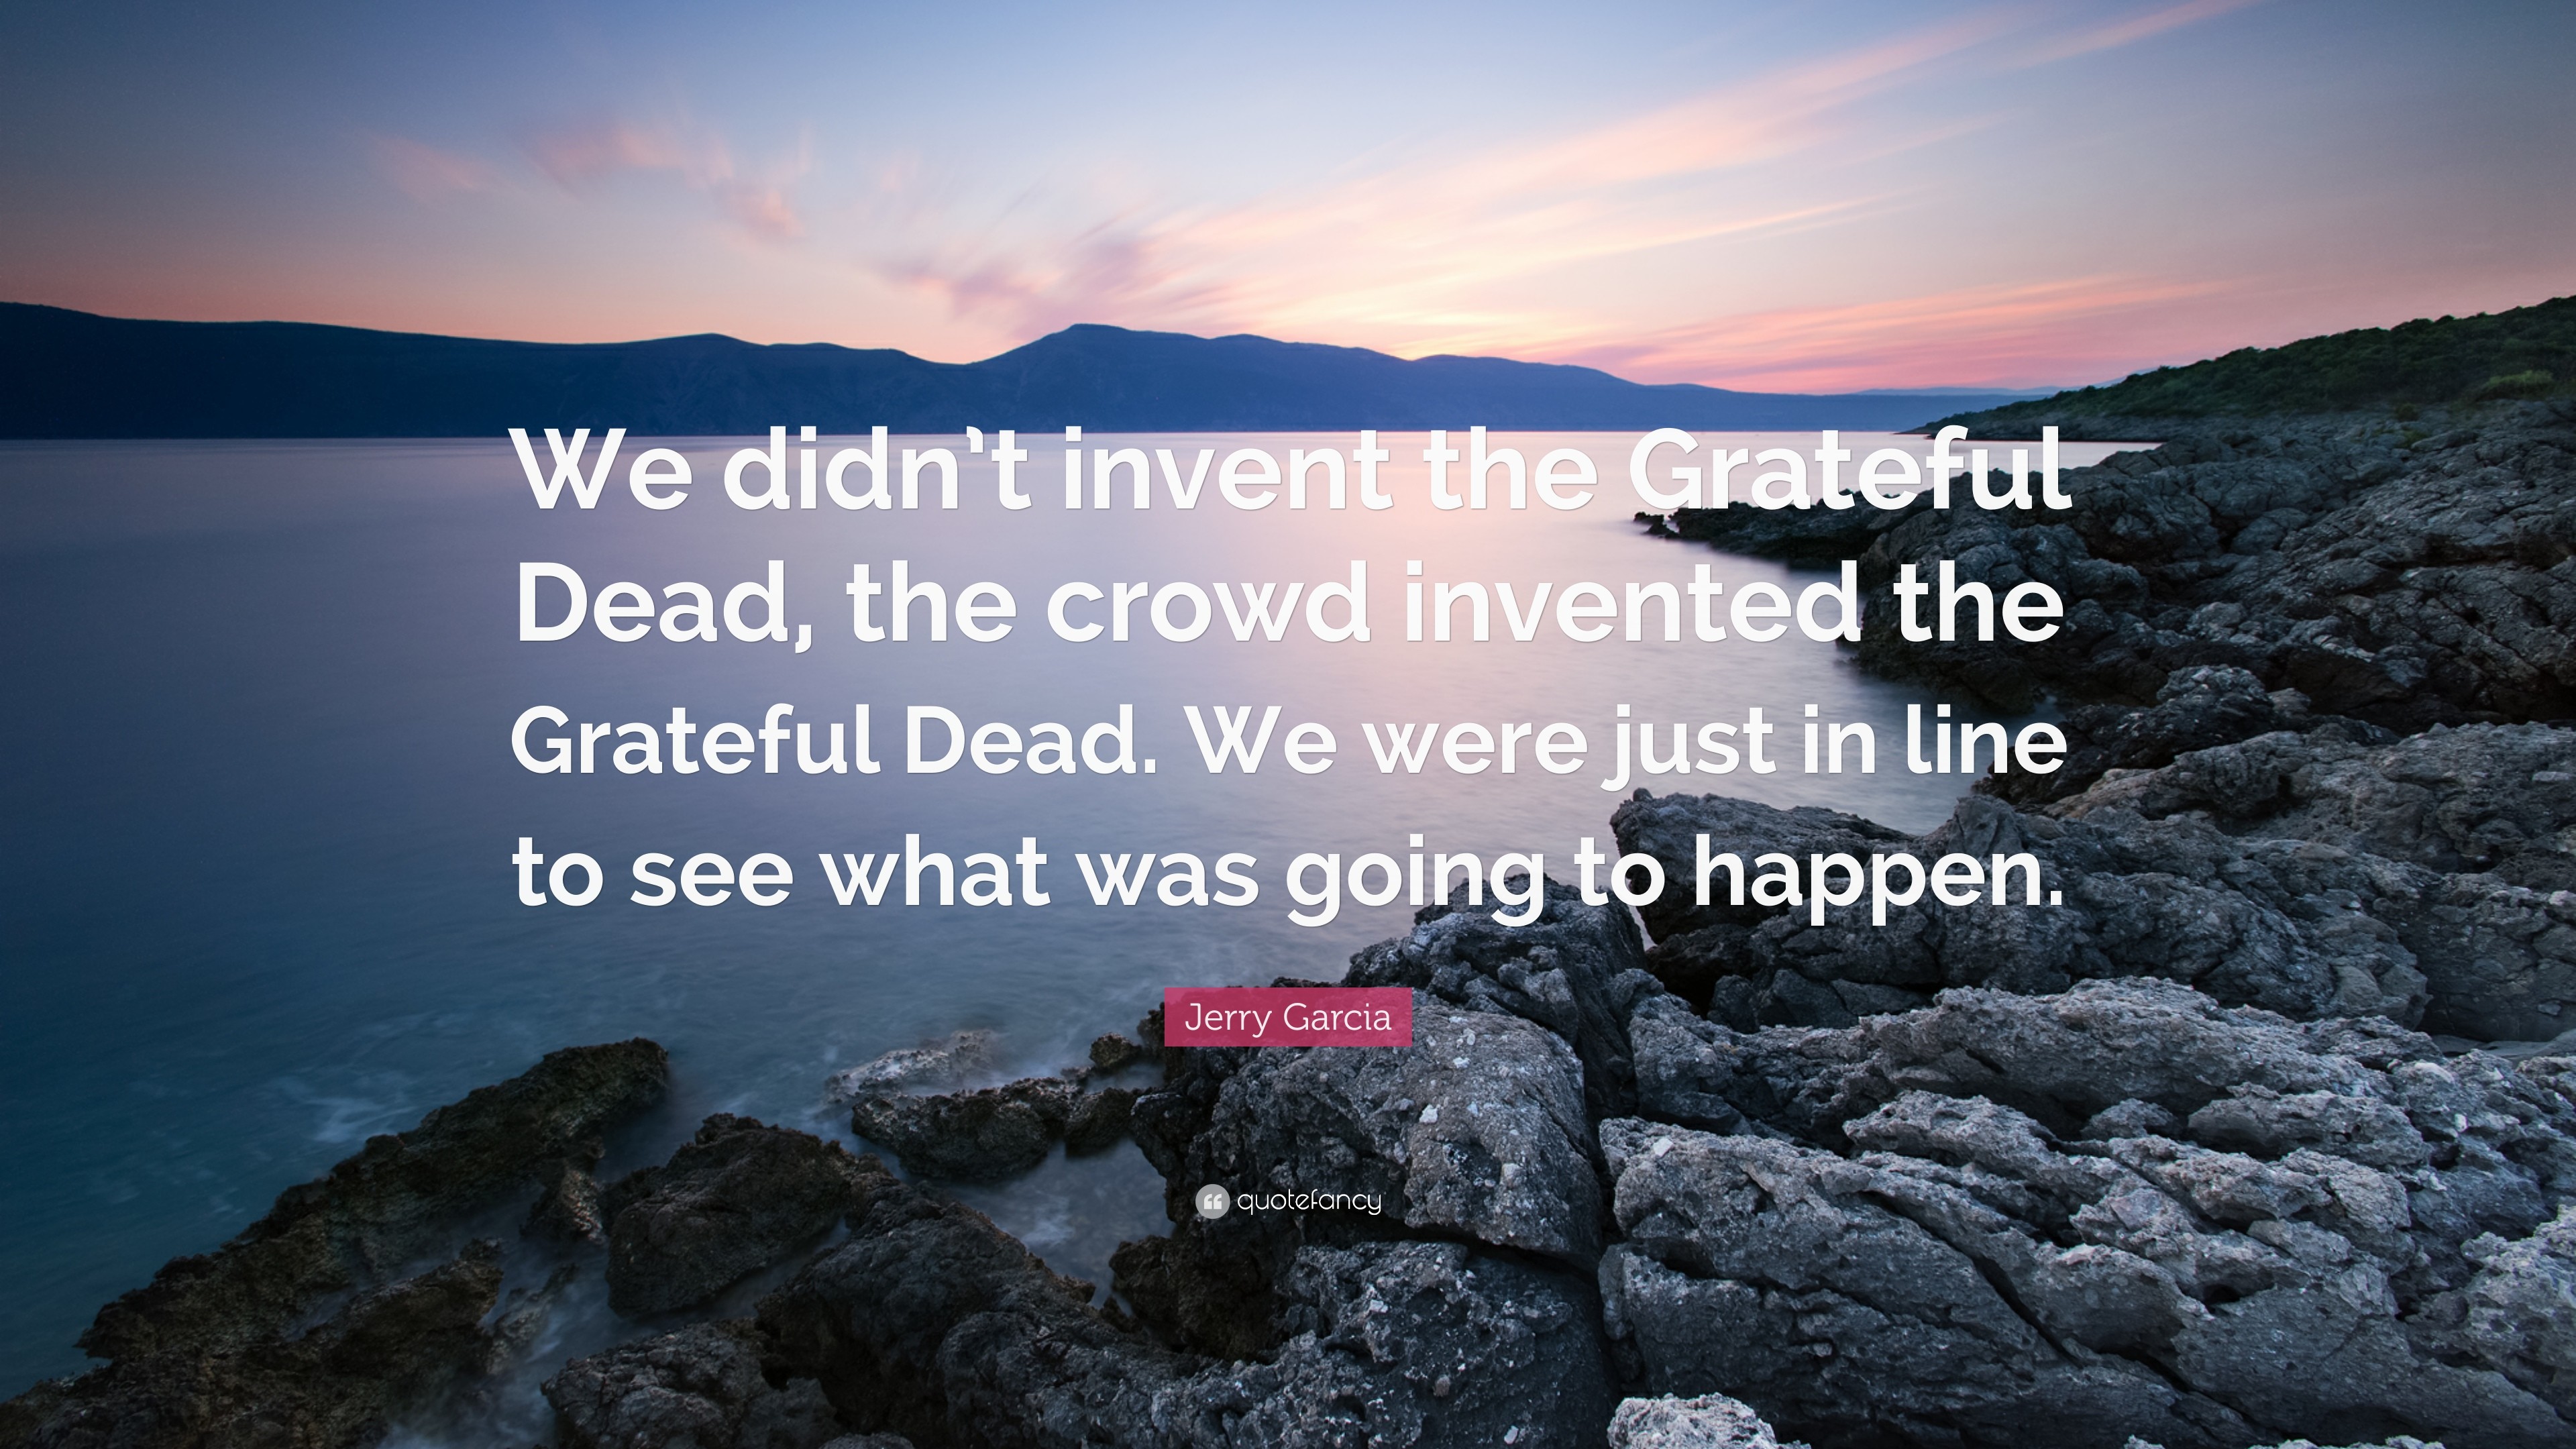 3840x2160 Jerry Garcia Quote: “We didn't invent the Grateful Dead, the crowd